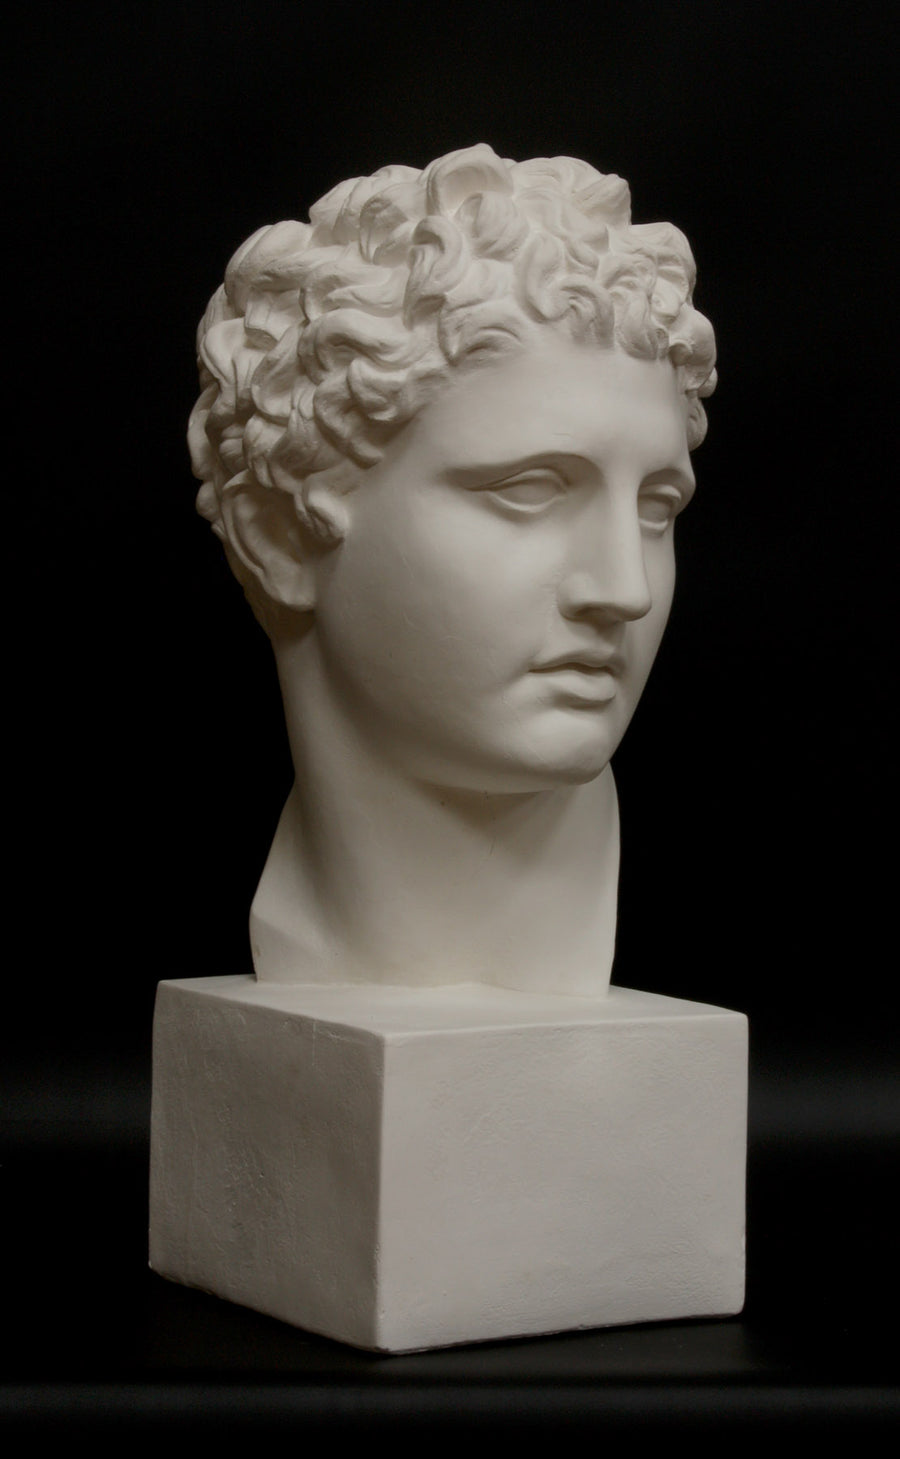 photo of white plaster cast of ancient sculpture of male head with curls, namely Meleager, on square base on black background